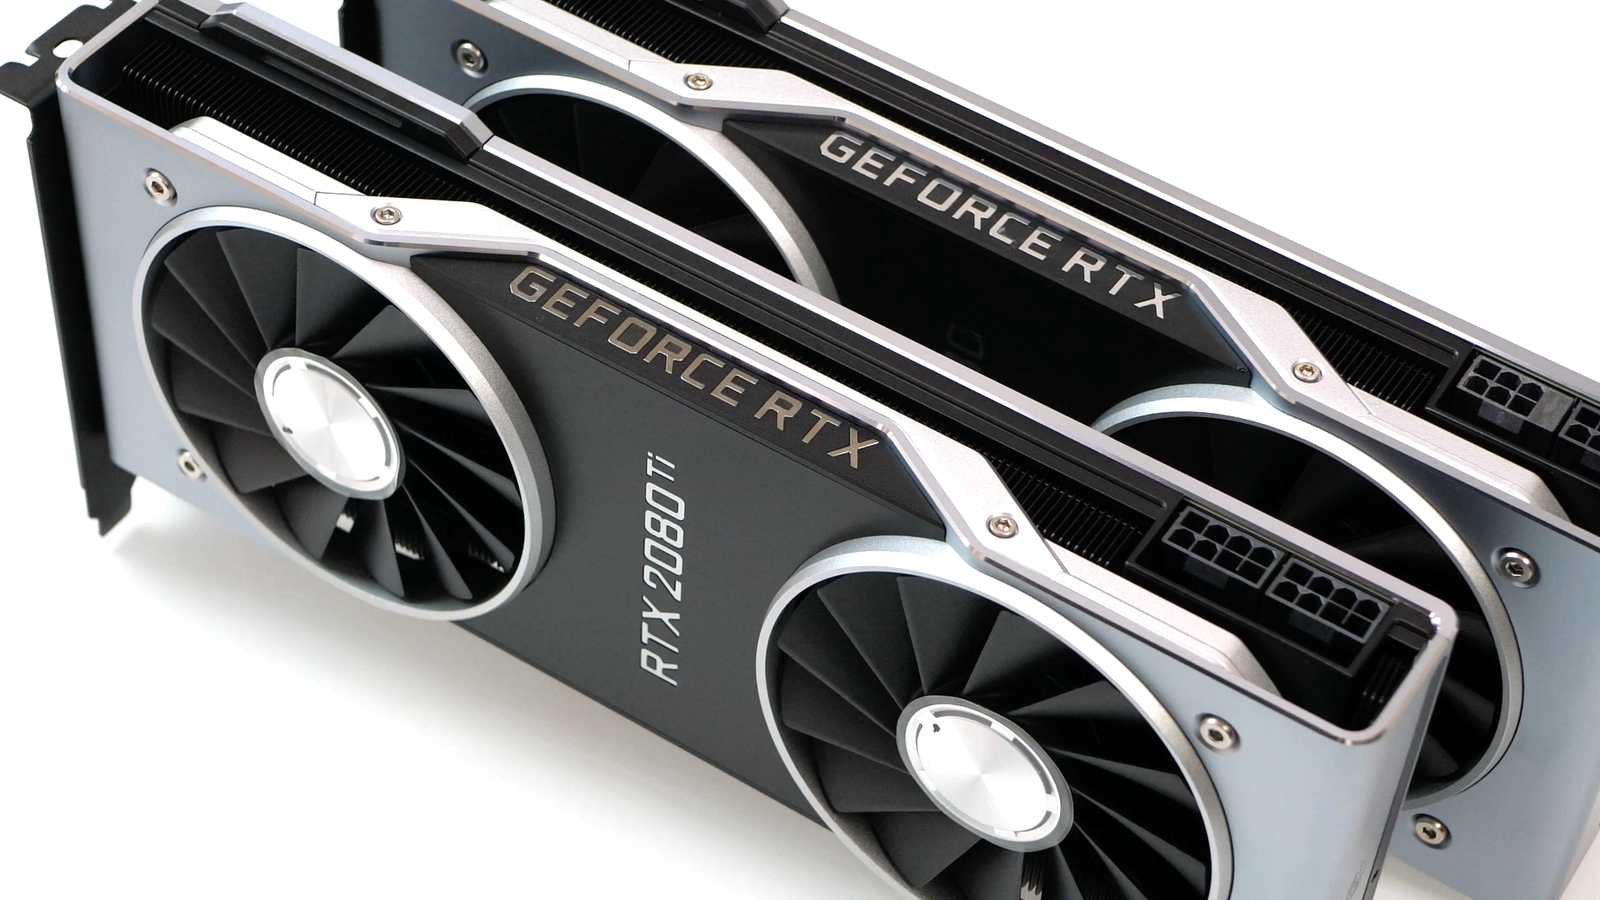 Objector element foretage GeForce RTX 2080/ RTX 2080 Ti: is DLSS a game-changer? | Eurogamer.net